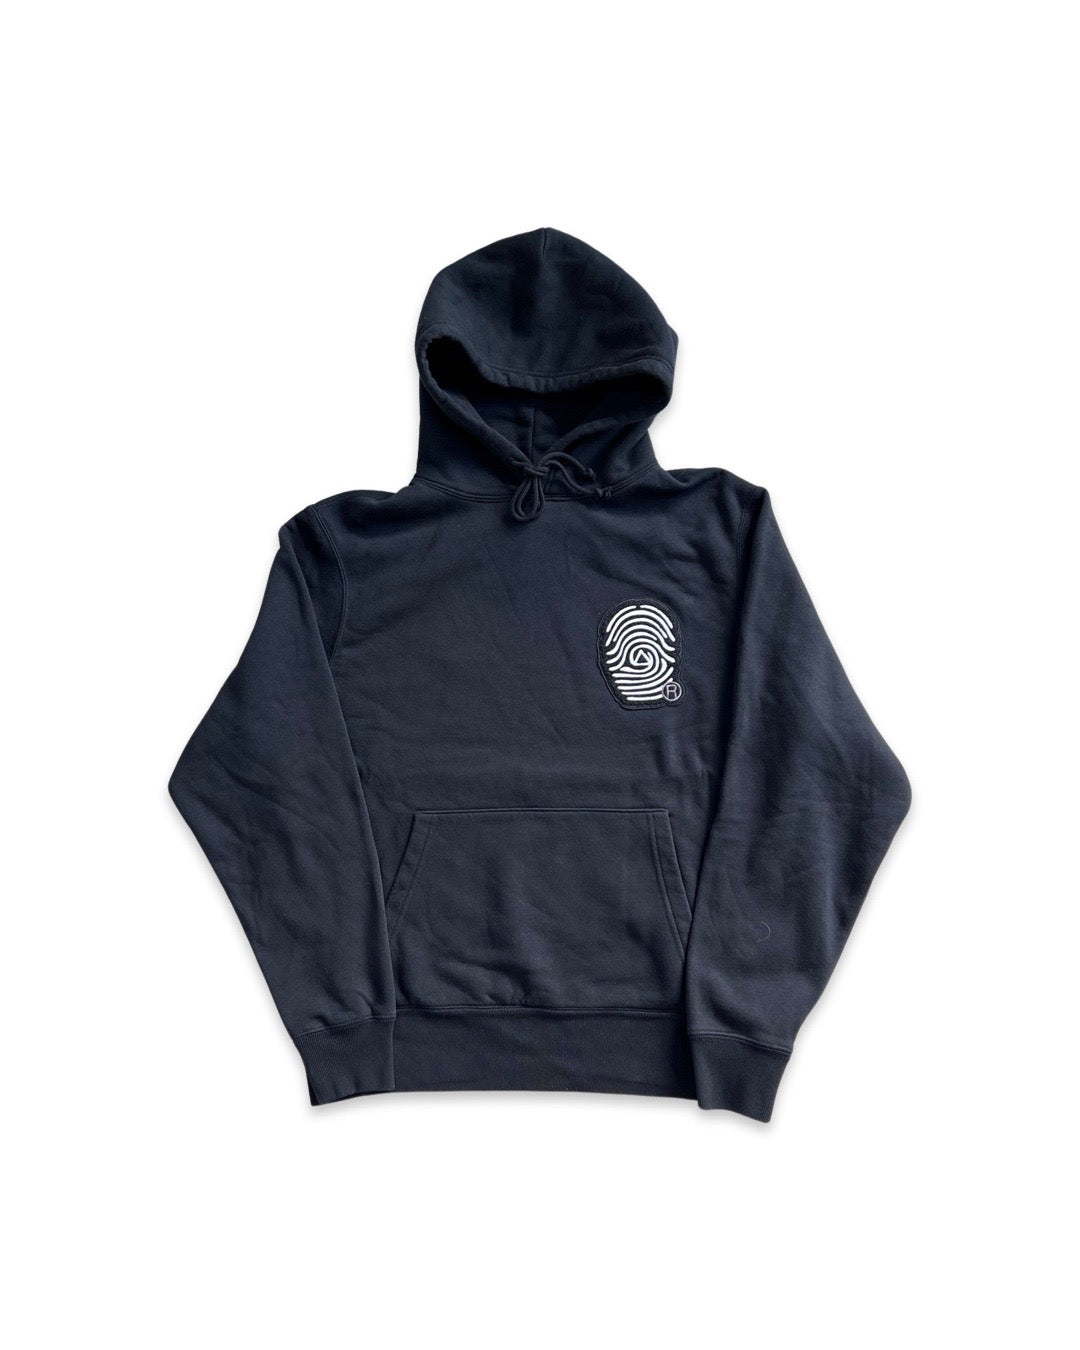 INDIVIDUALIST CHENILLE PATCH HOODIE